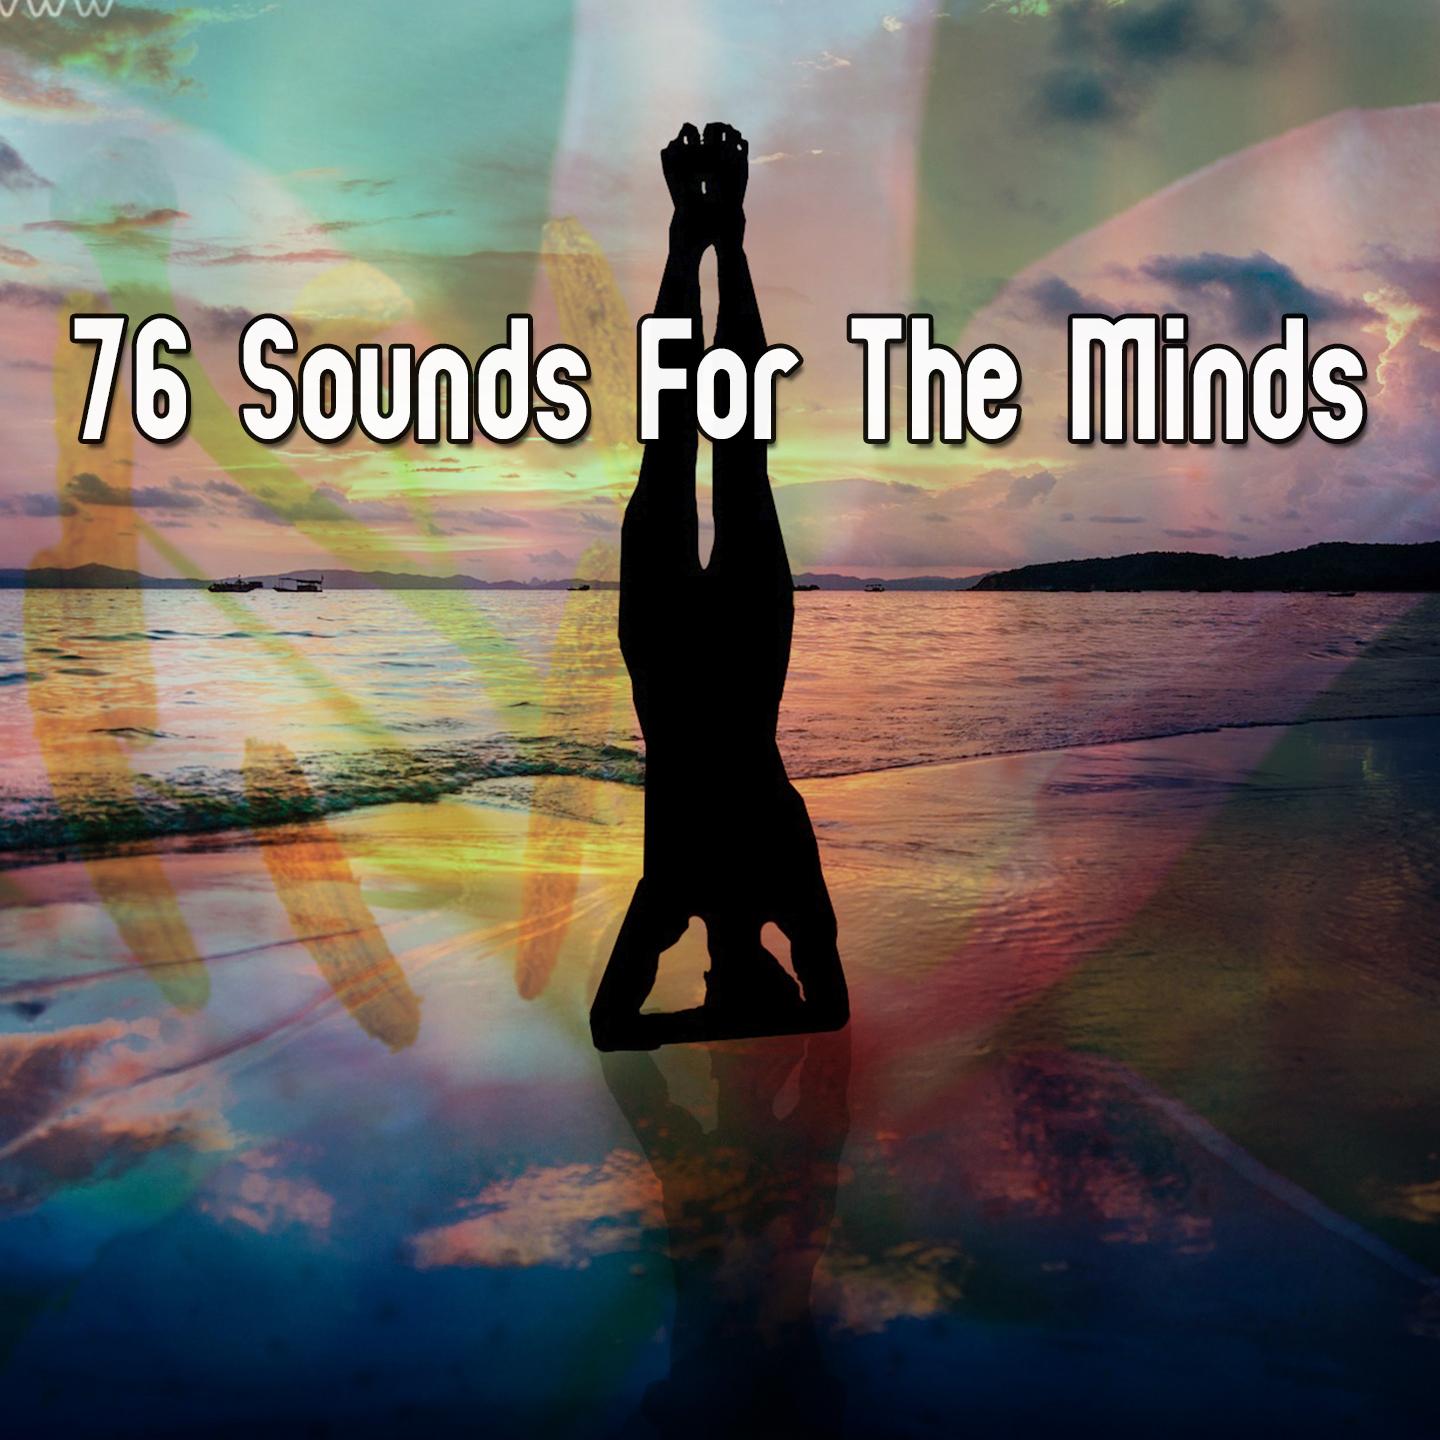 76 Sounds For The Minds